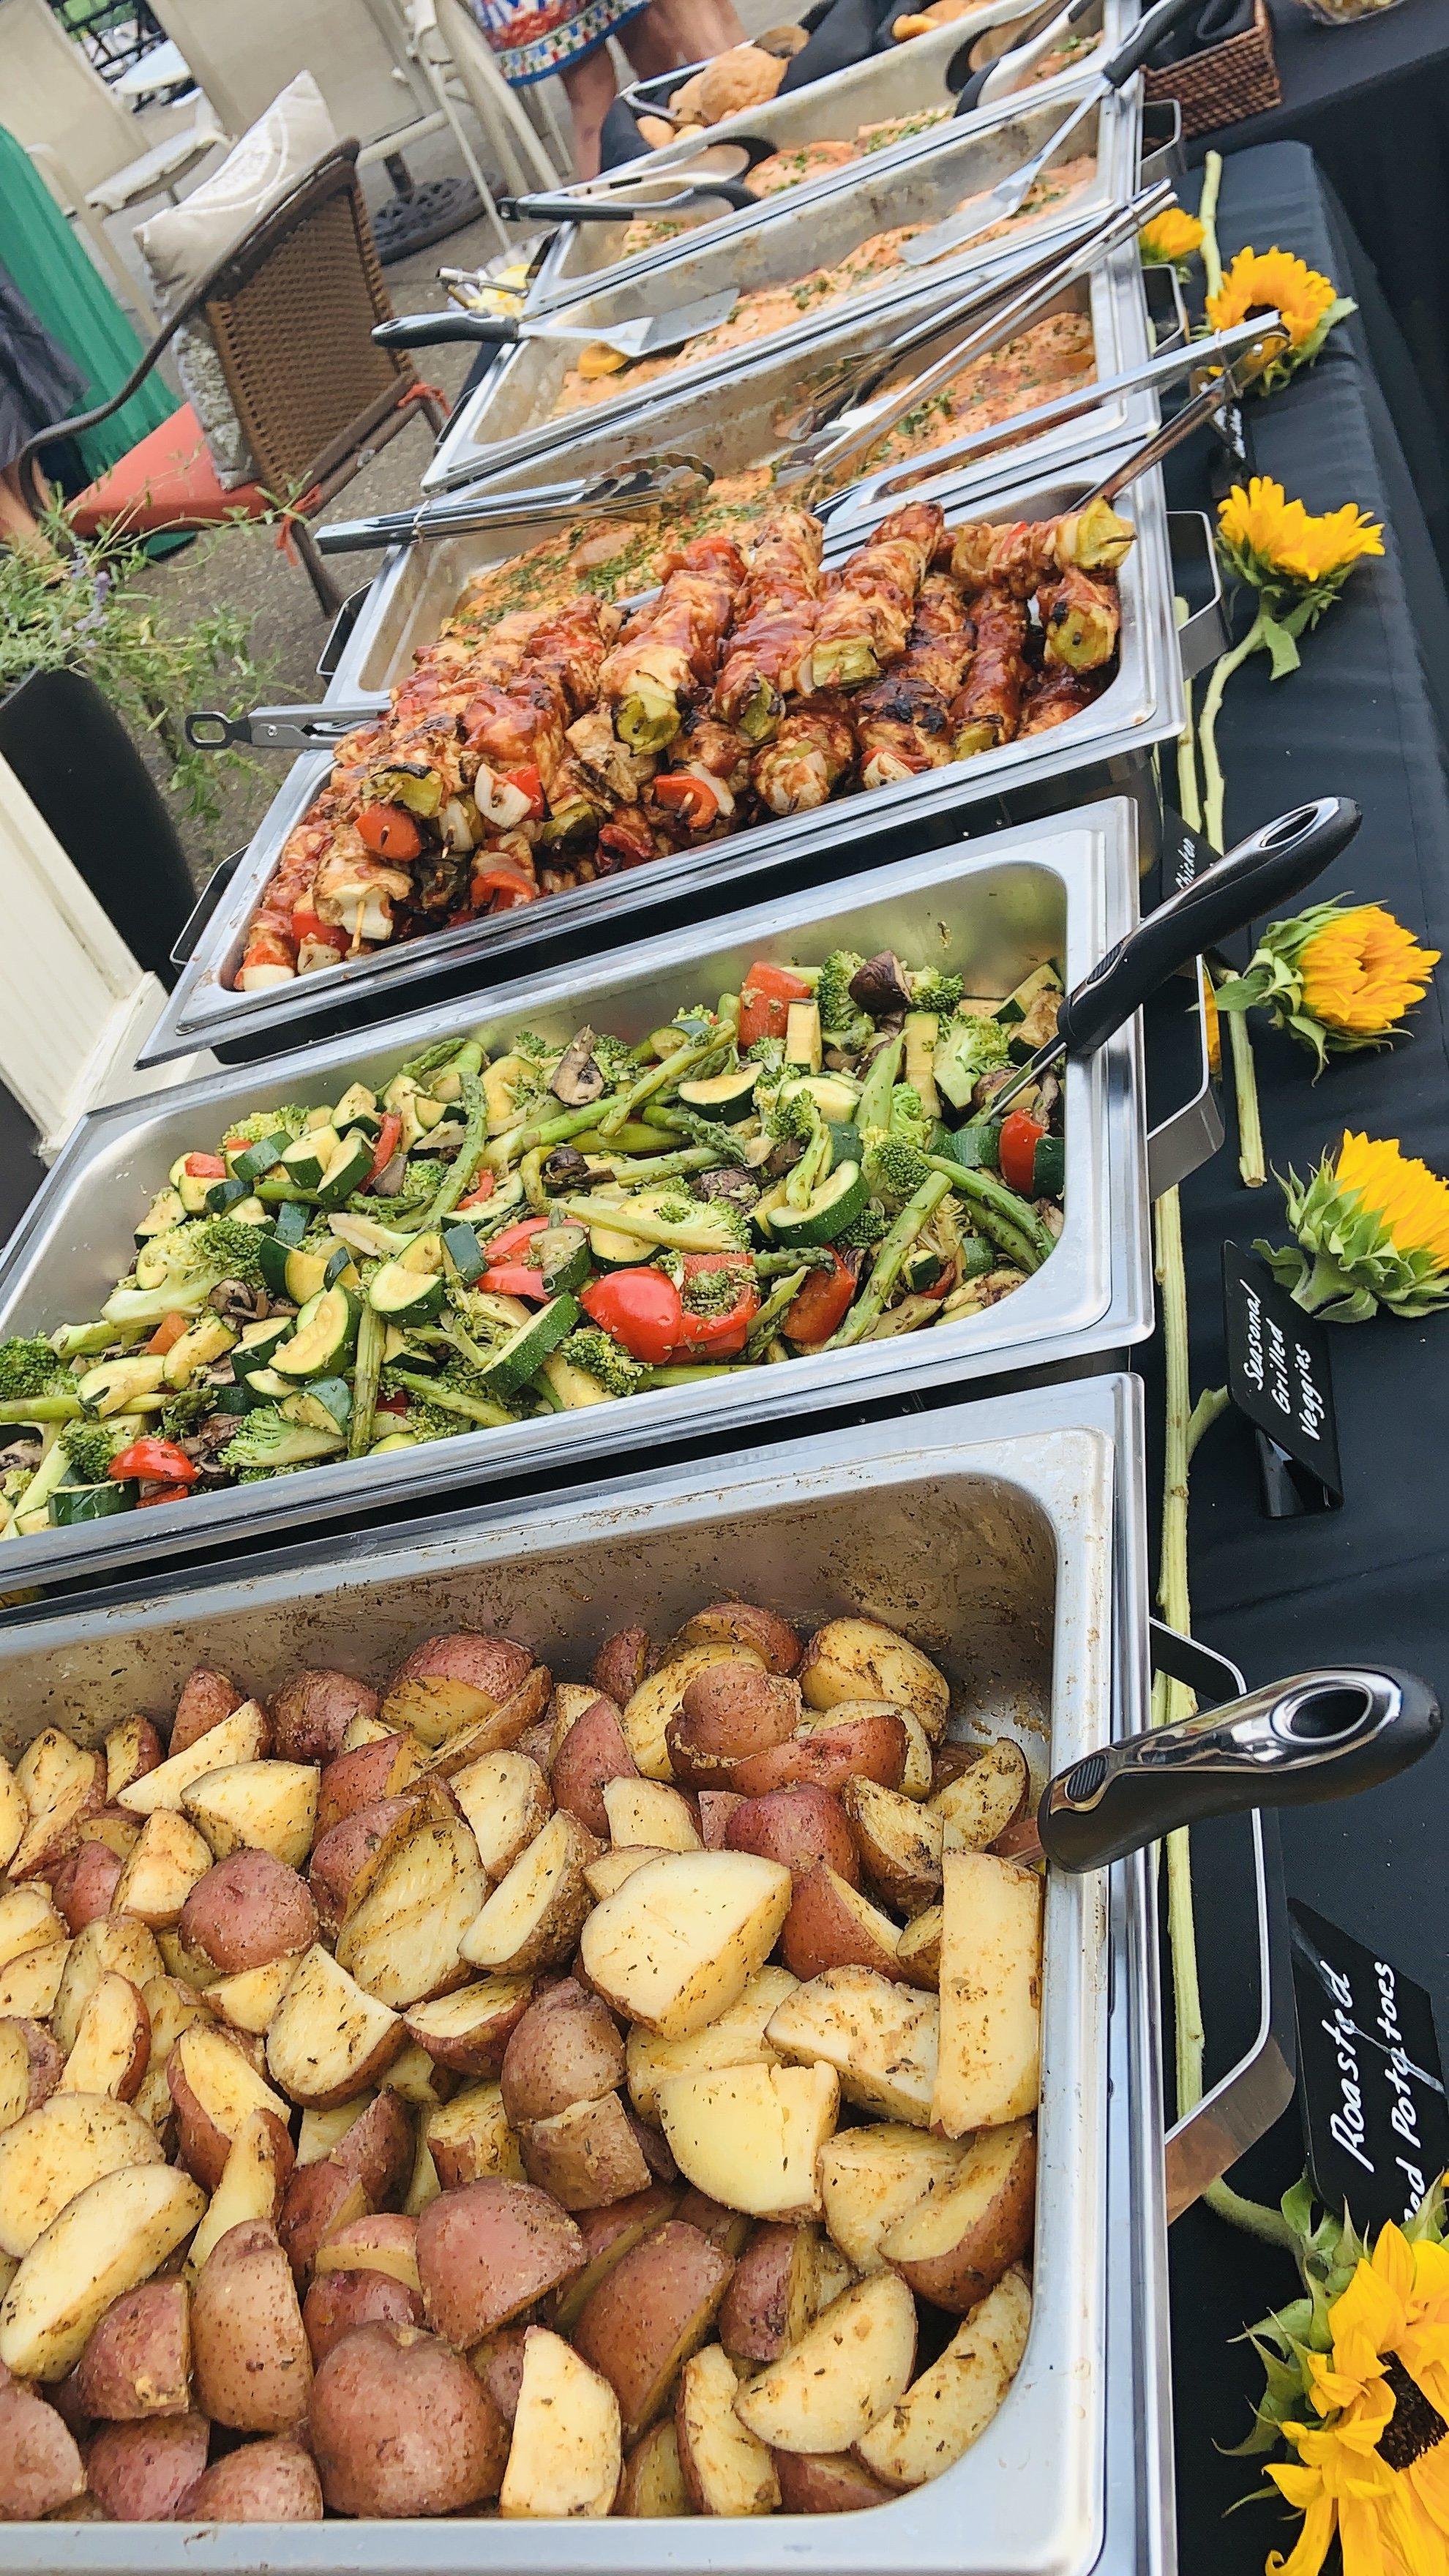 Roasted Potatoes, Mixed Vegetables, Chicken Skewers, Salmon